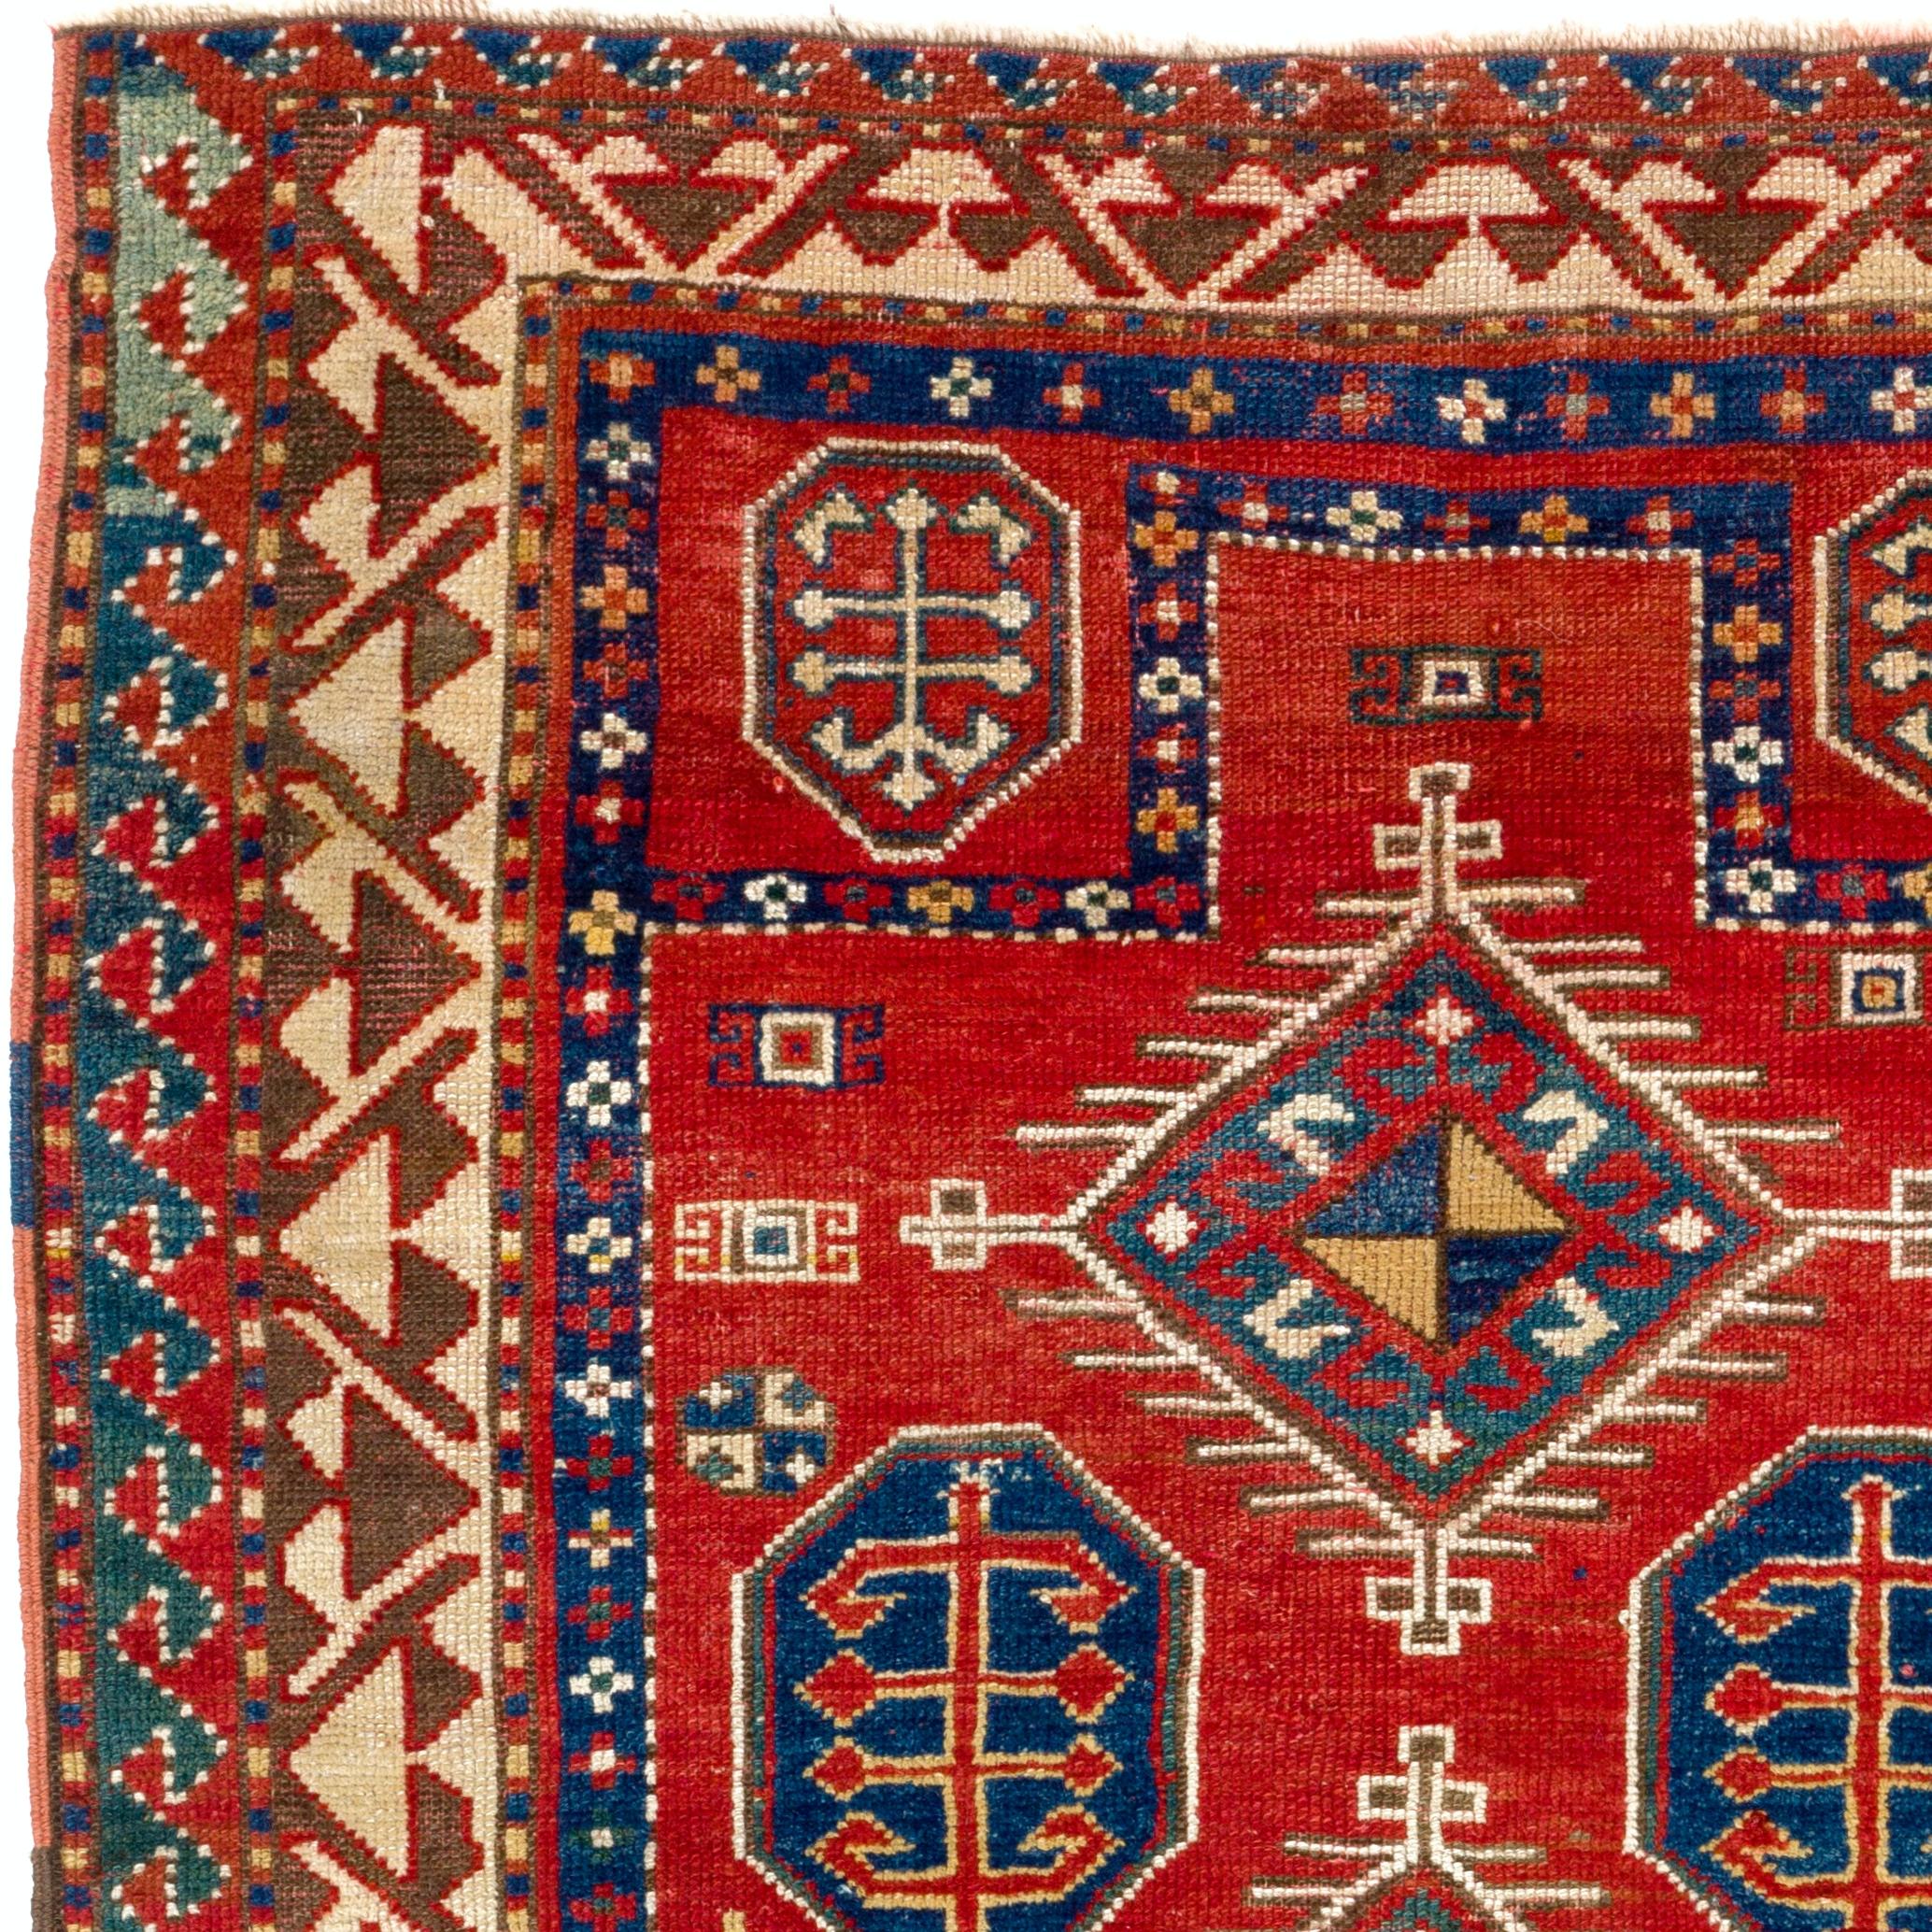 Antique Caucasian Borchalo Kazak Prayer rug. 
Finely hand-knotted with even medium wool pile on wool foundation. 
Very good condition. Sturdy and as clean as a brand new rug (deep washed professionally). 
Size: 3.5 x 3.9 ft.